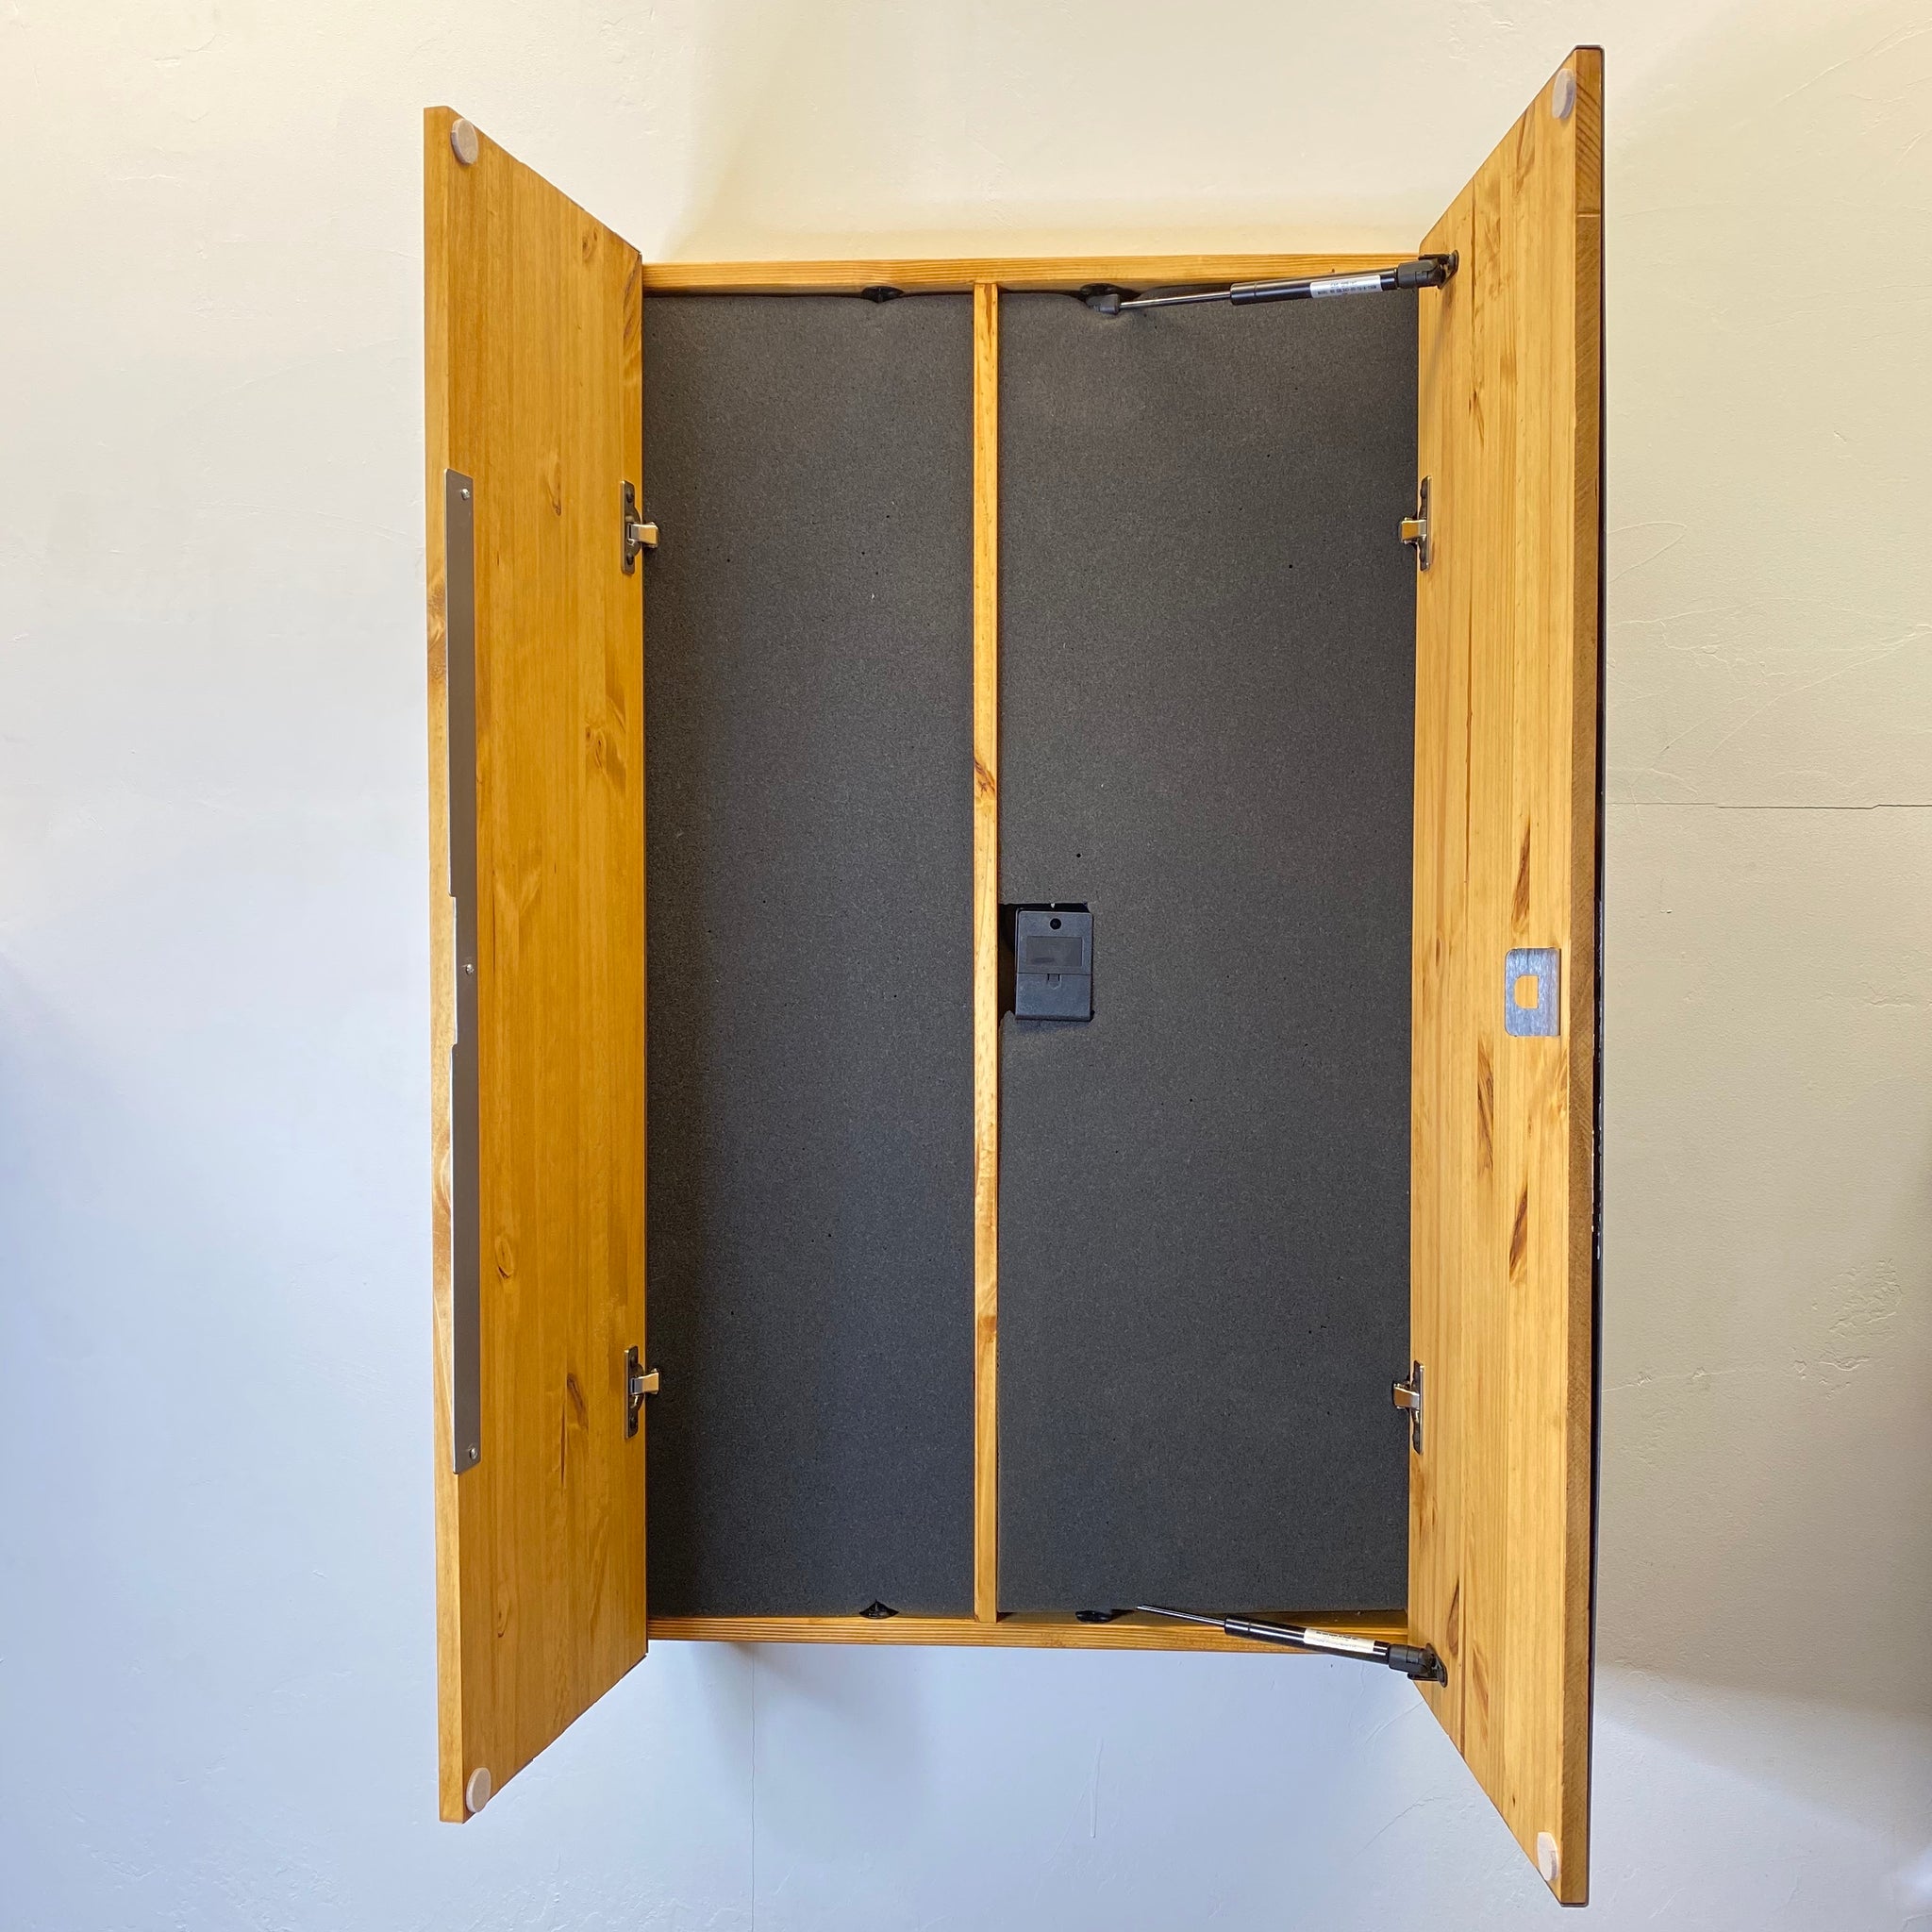 The VERTICAL Freedom Cabinet